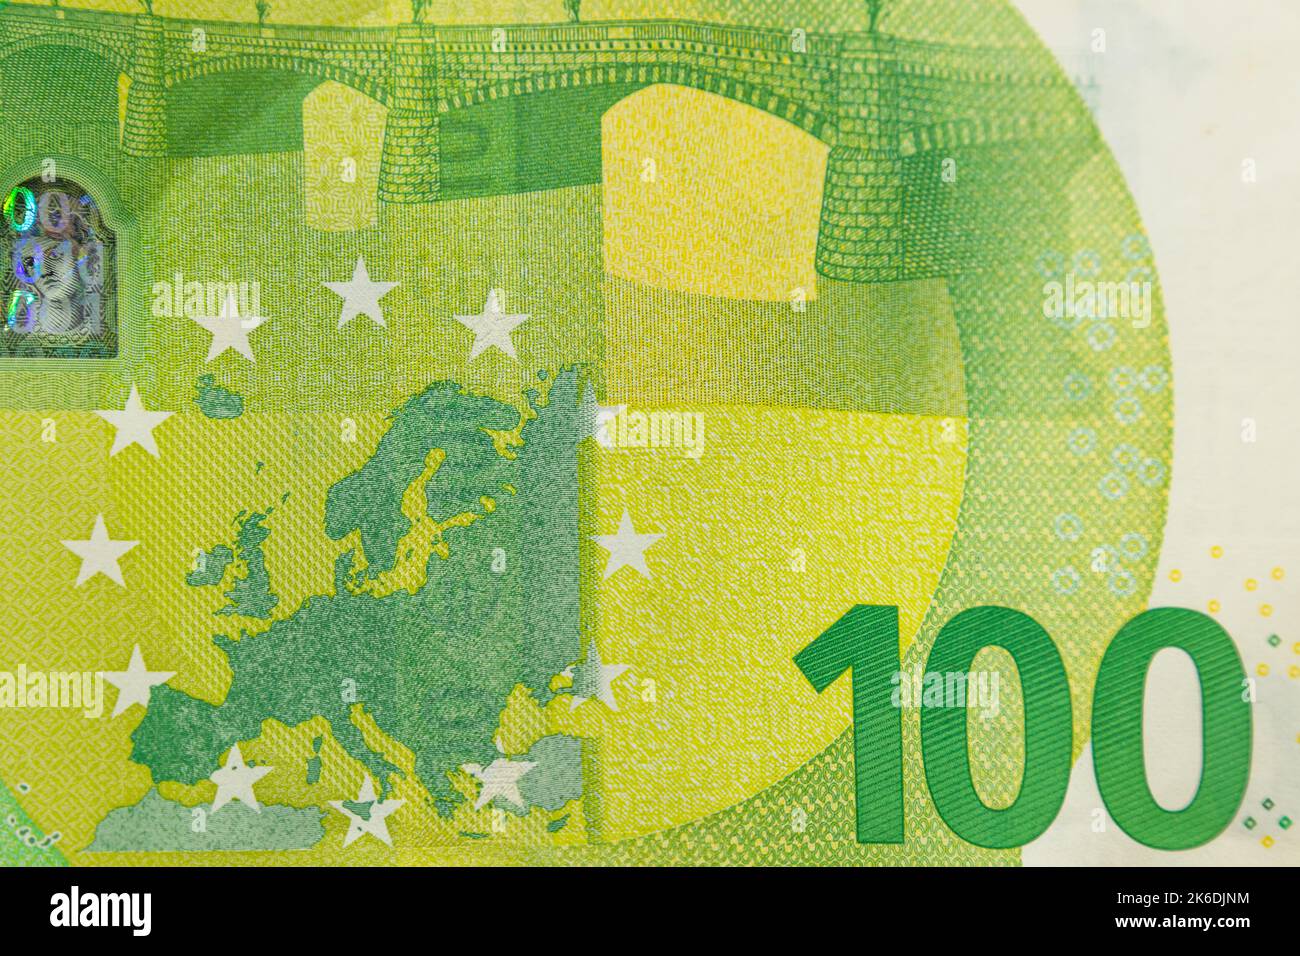 Europe map on a hundred euro banknote bill. Concept of uniting European countries Stock Photo